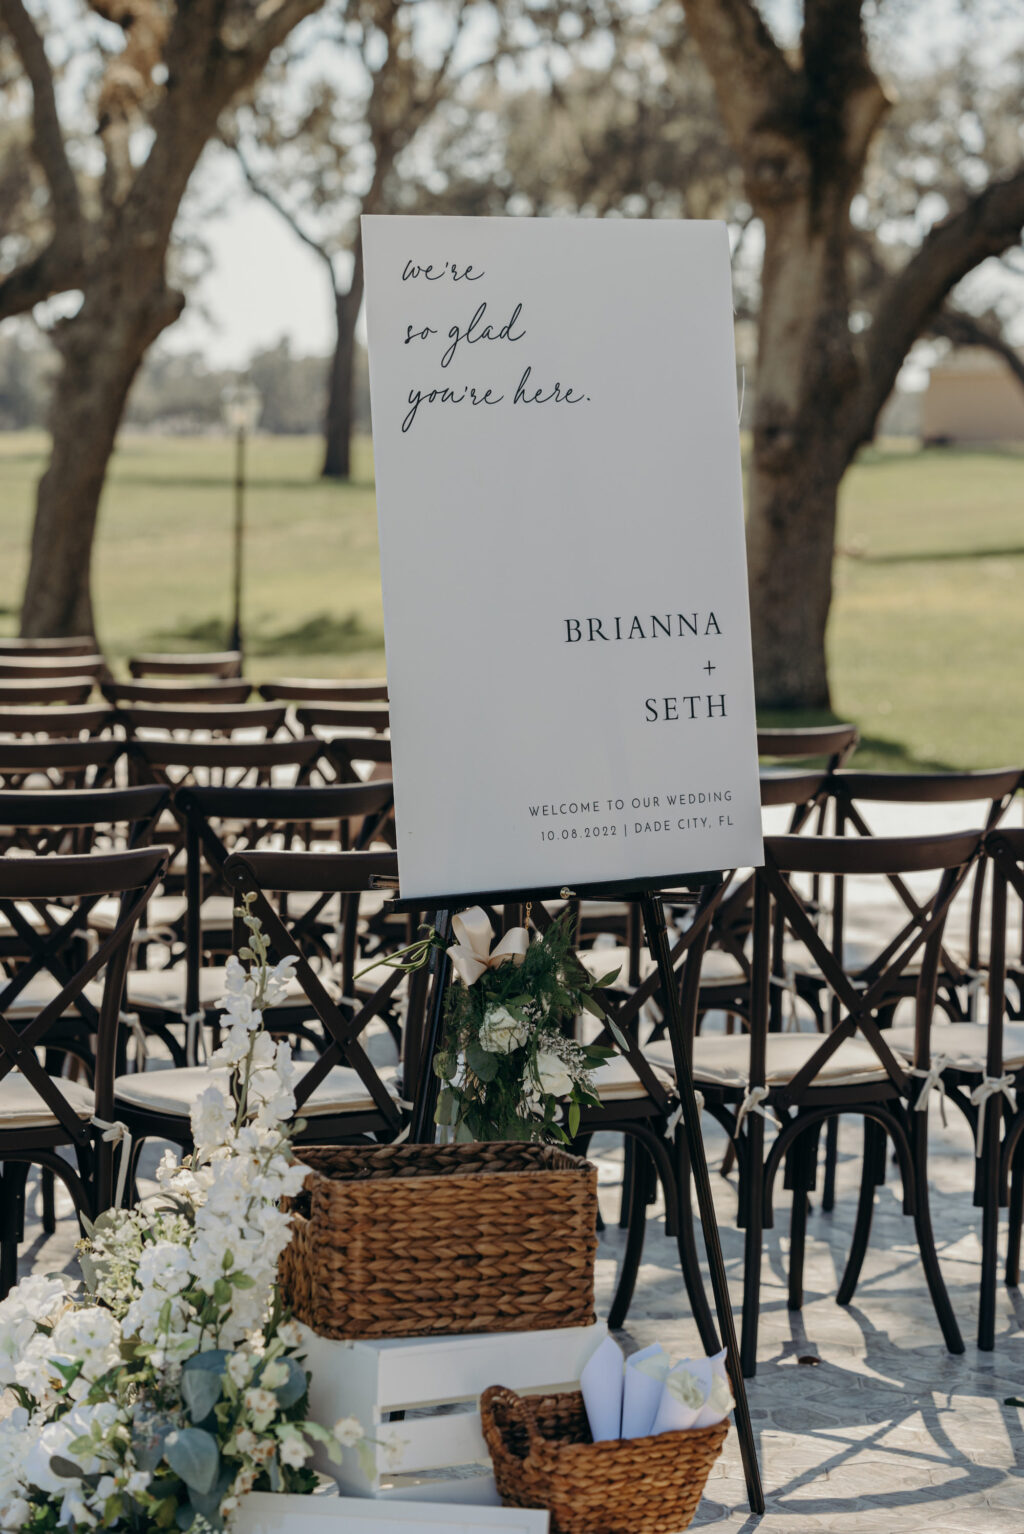 White and Black Modern Classic Welcome Wedding Sign at Outdoor Wedding Ceremony with Crossback Black Chairs Inspiration